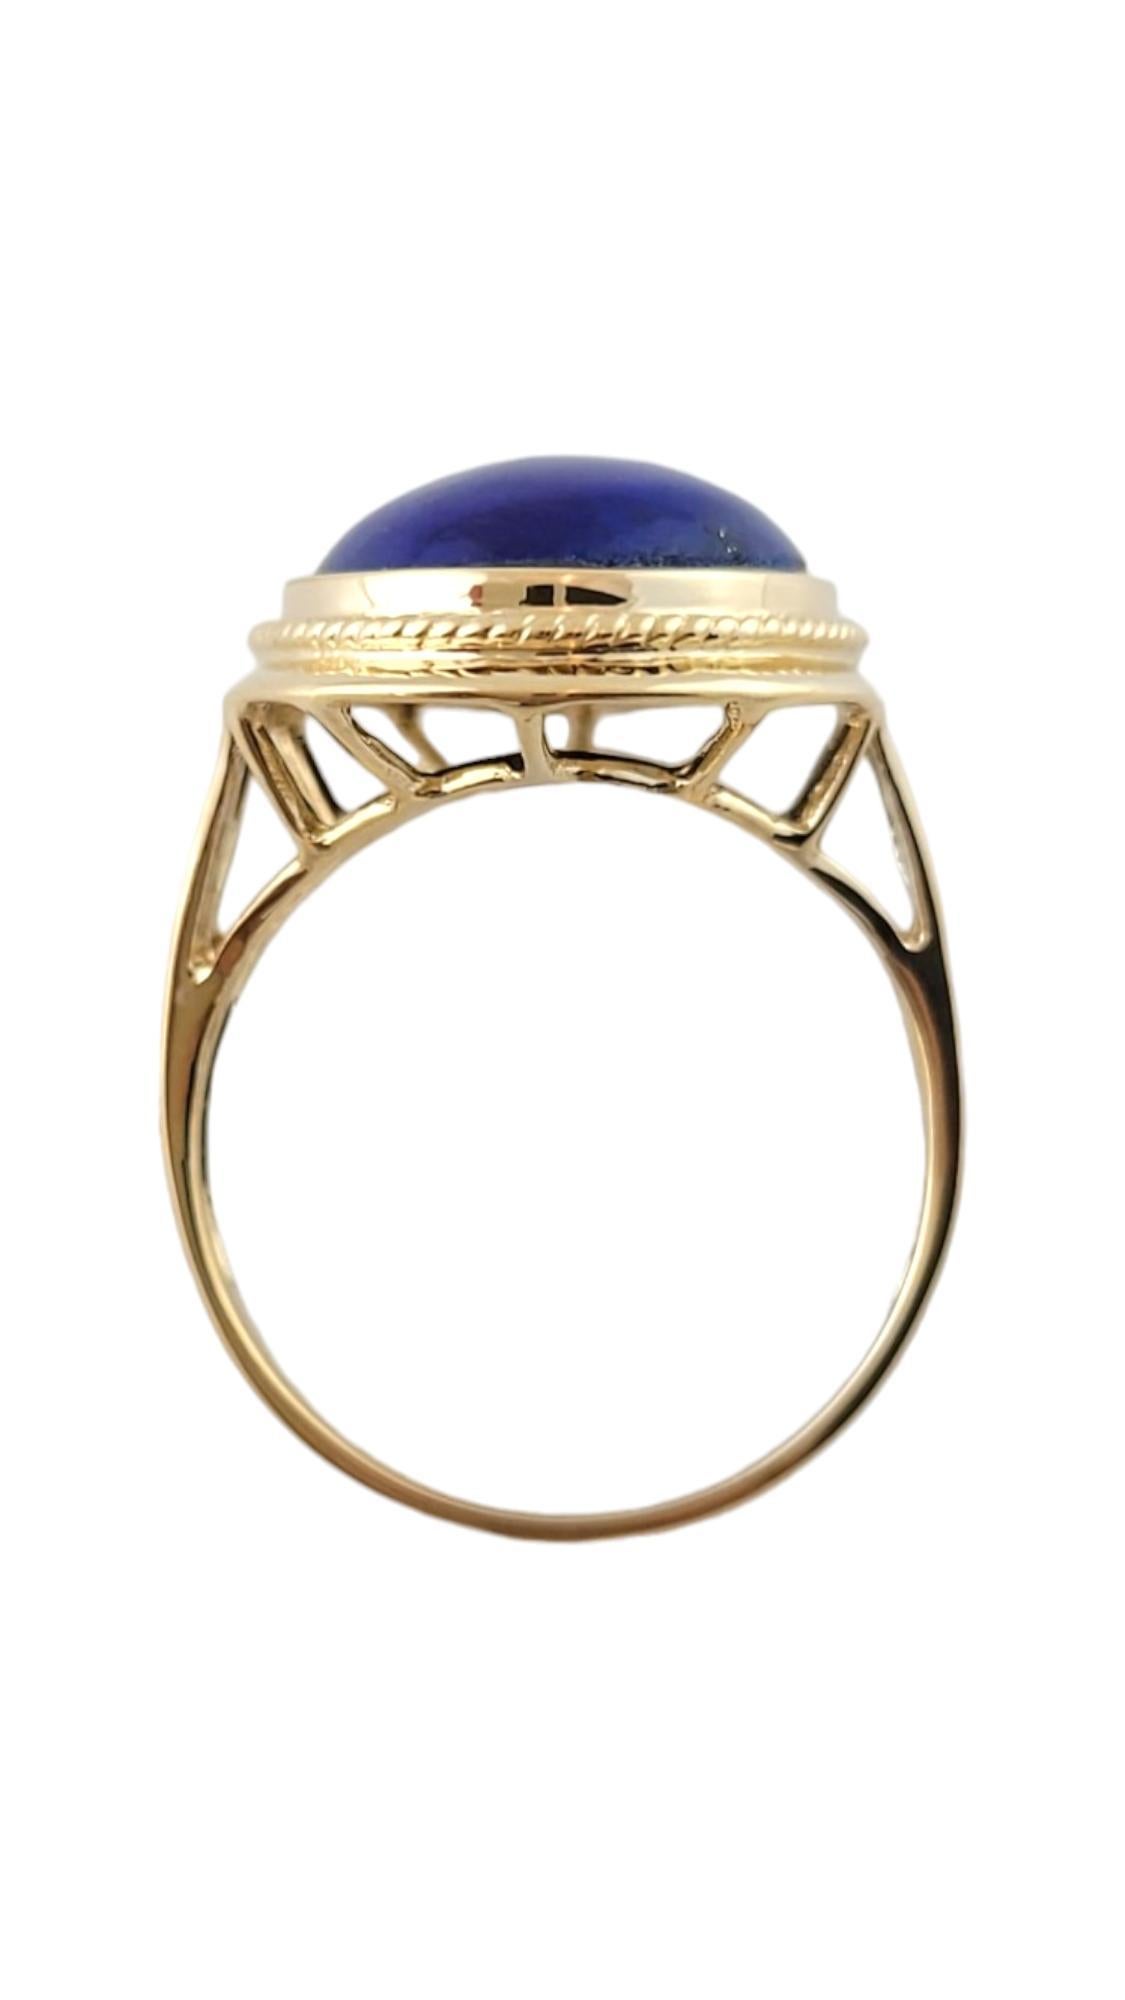 Oval Cut 14K Yellow Gold Oval Blue Lapis Ring Size 7.25 #17376